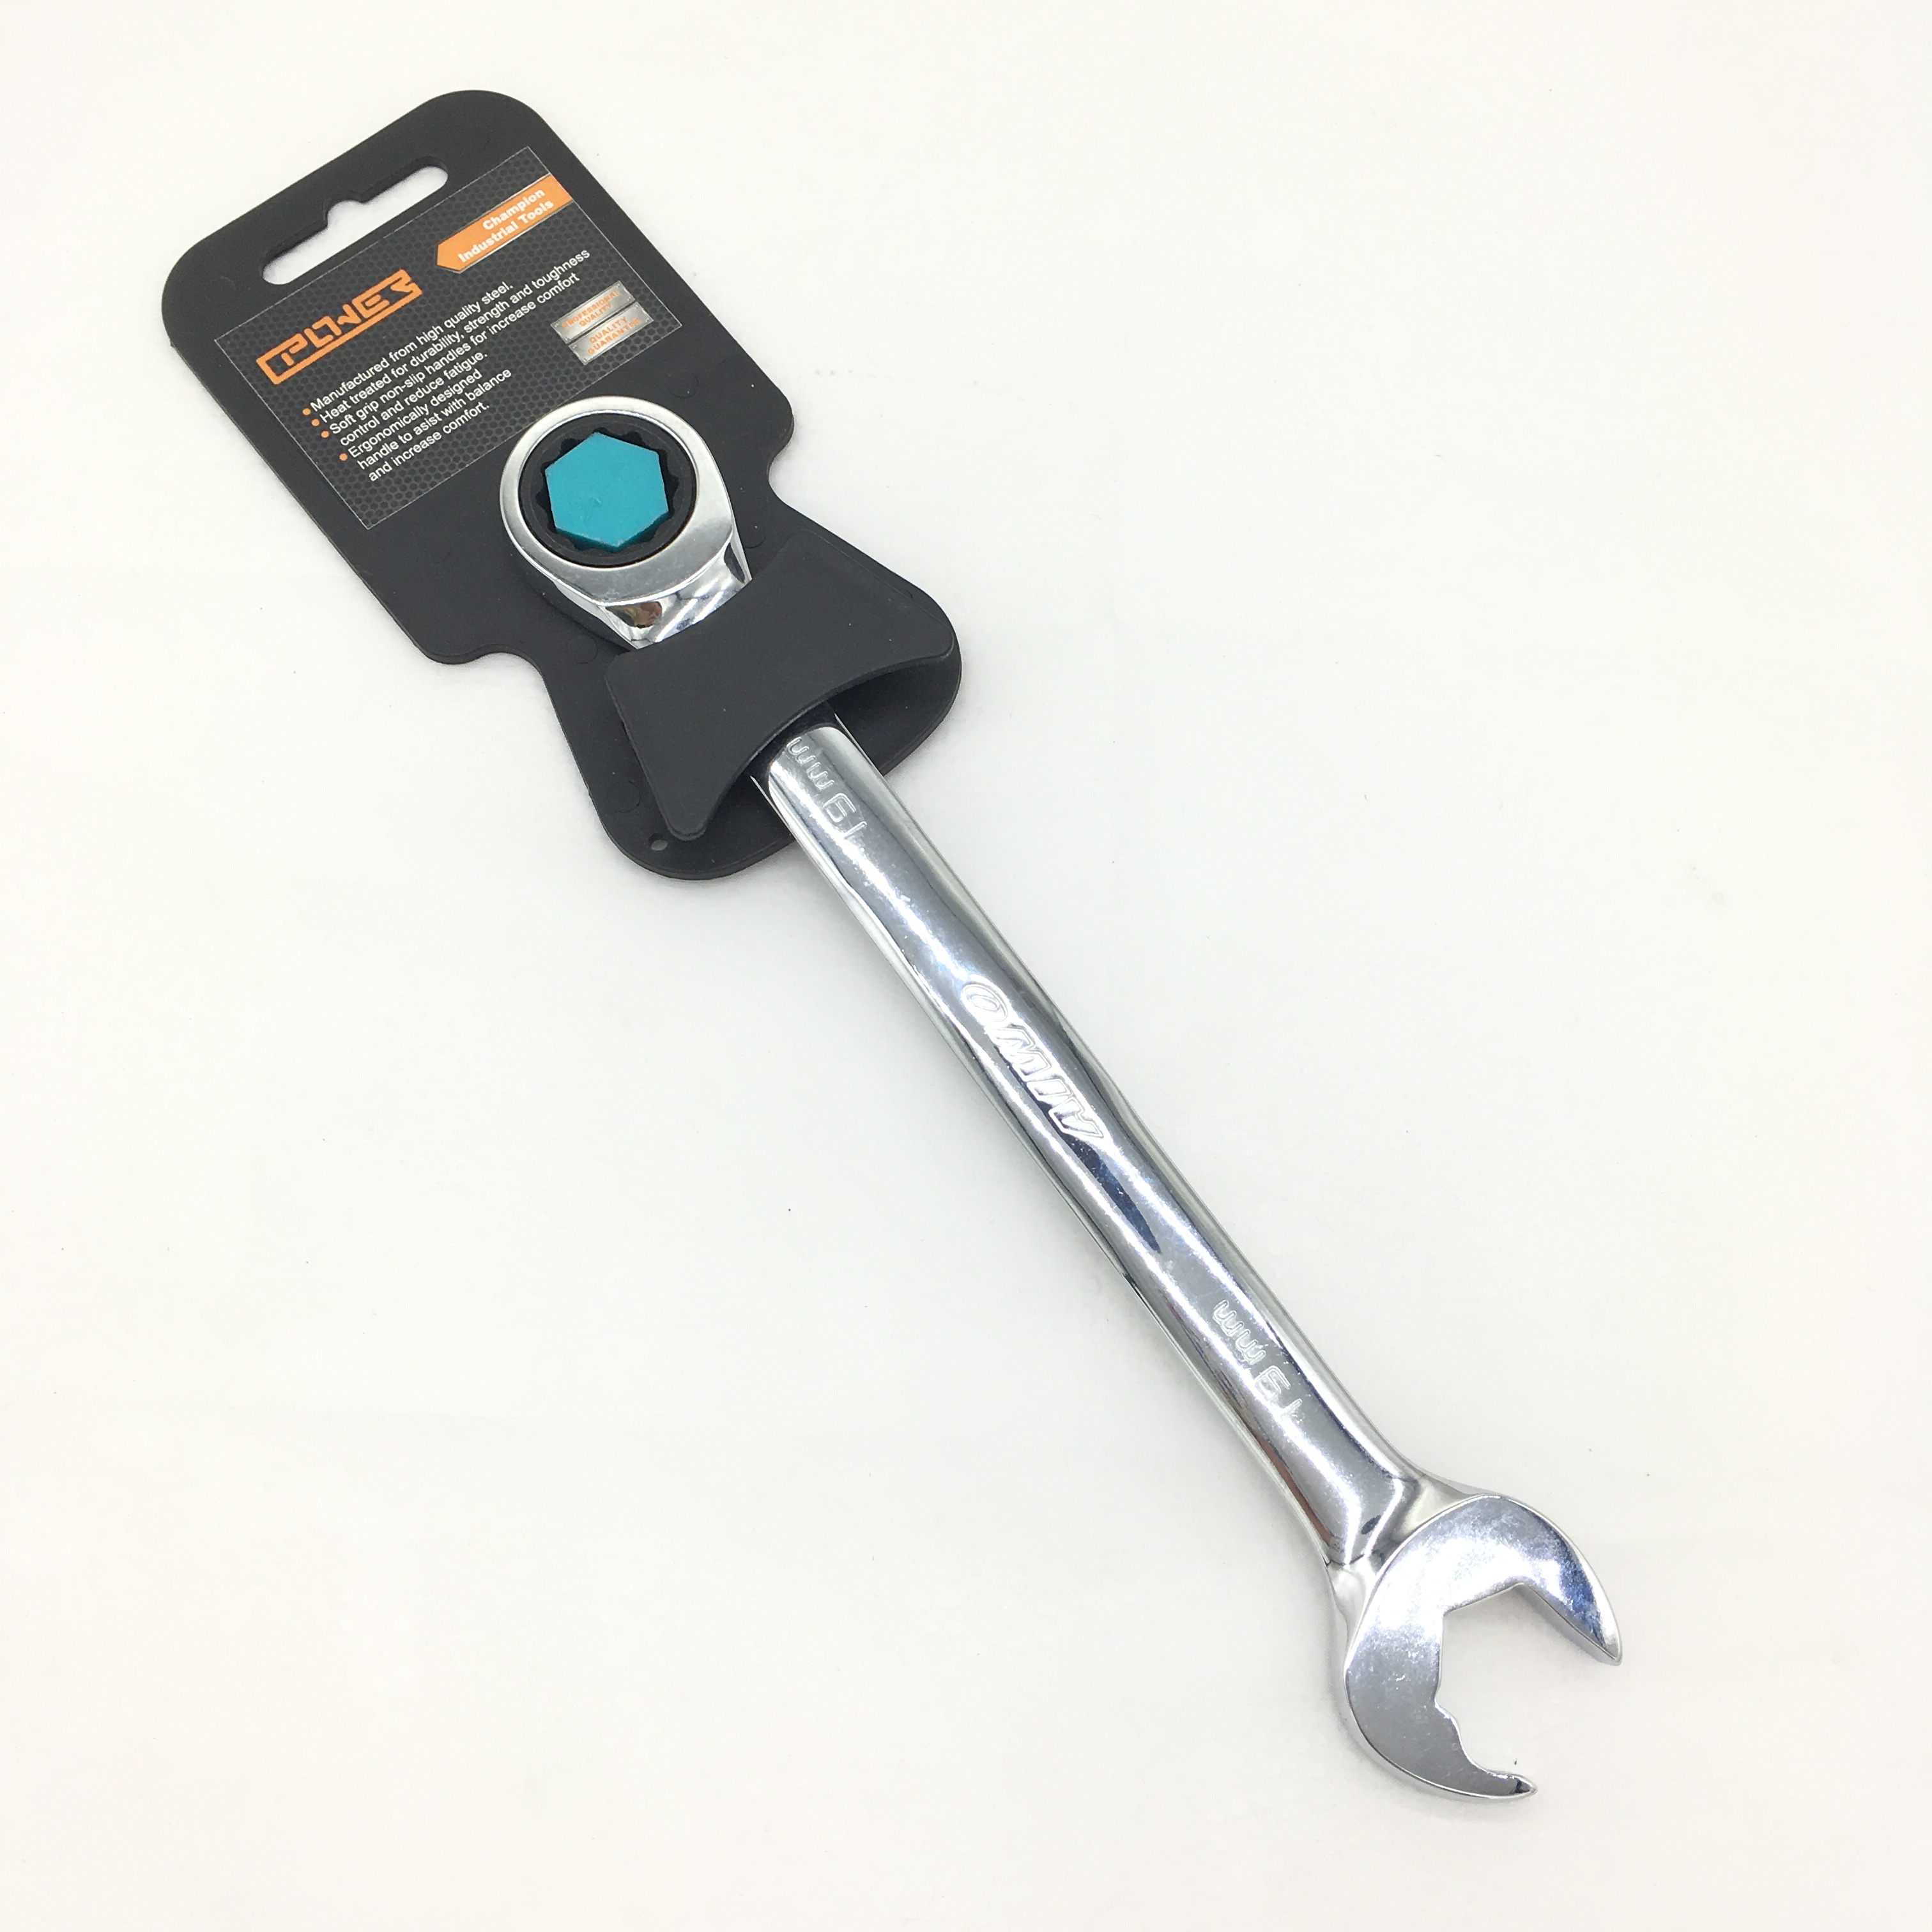 Quick Release Ratchet Combination Wrench